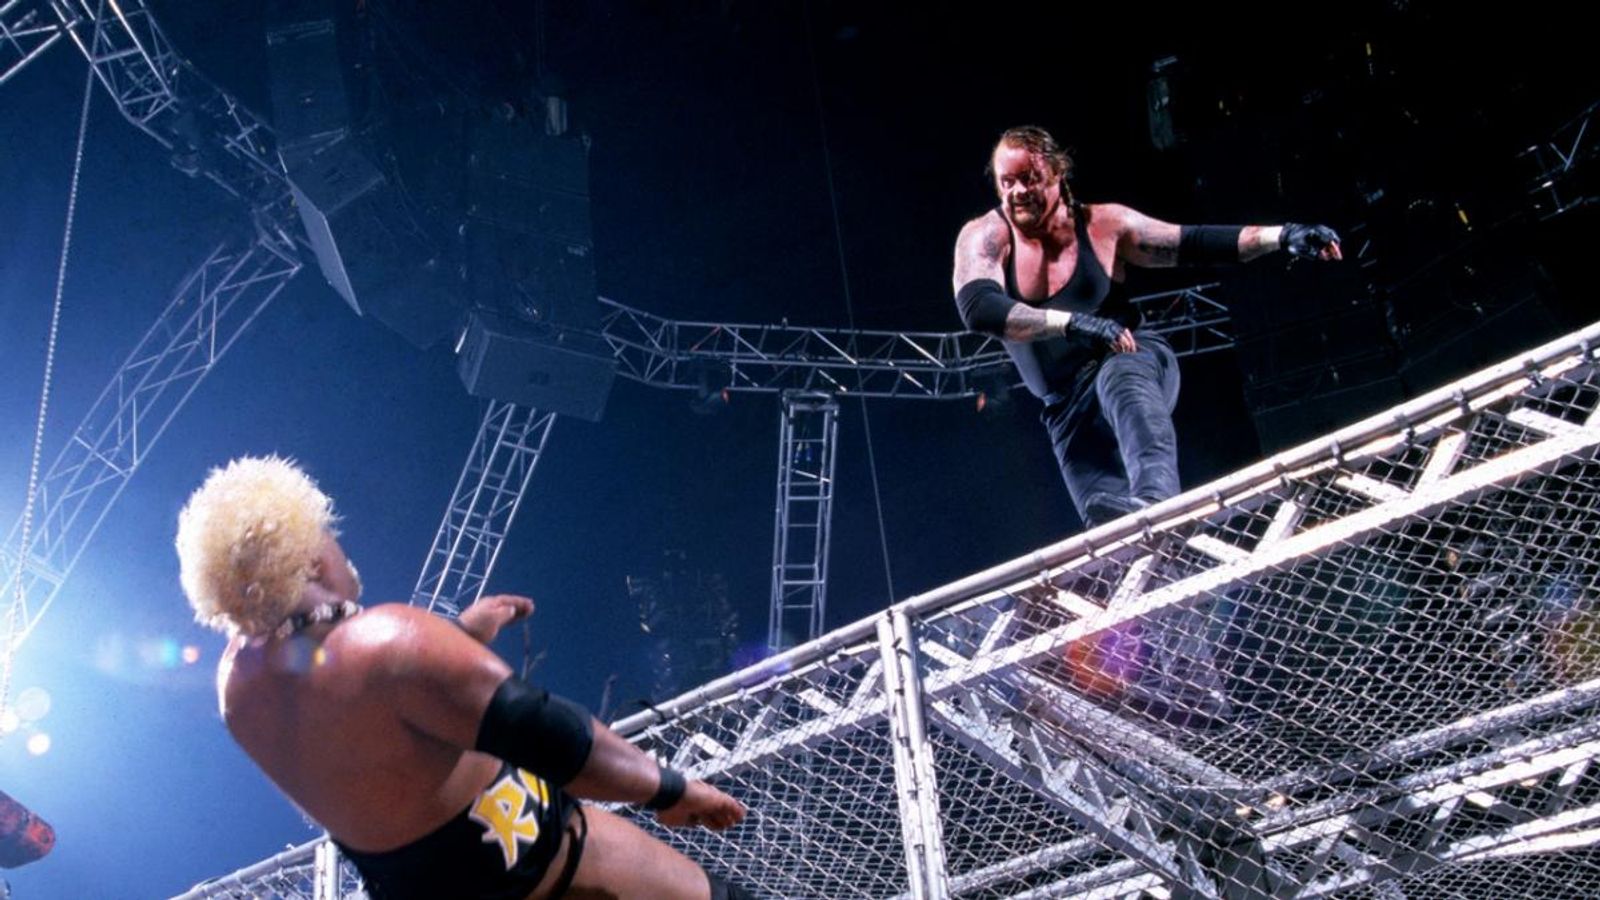 Undertaker vs rikishi hell in a cell